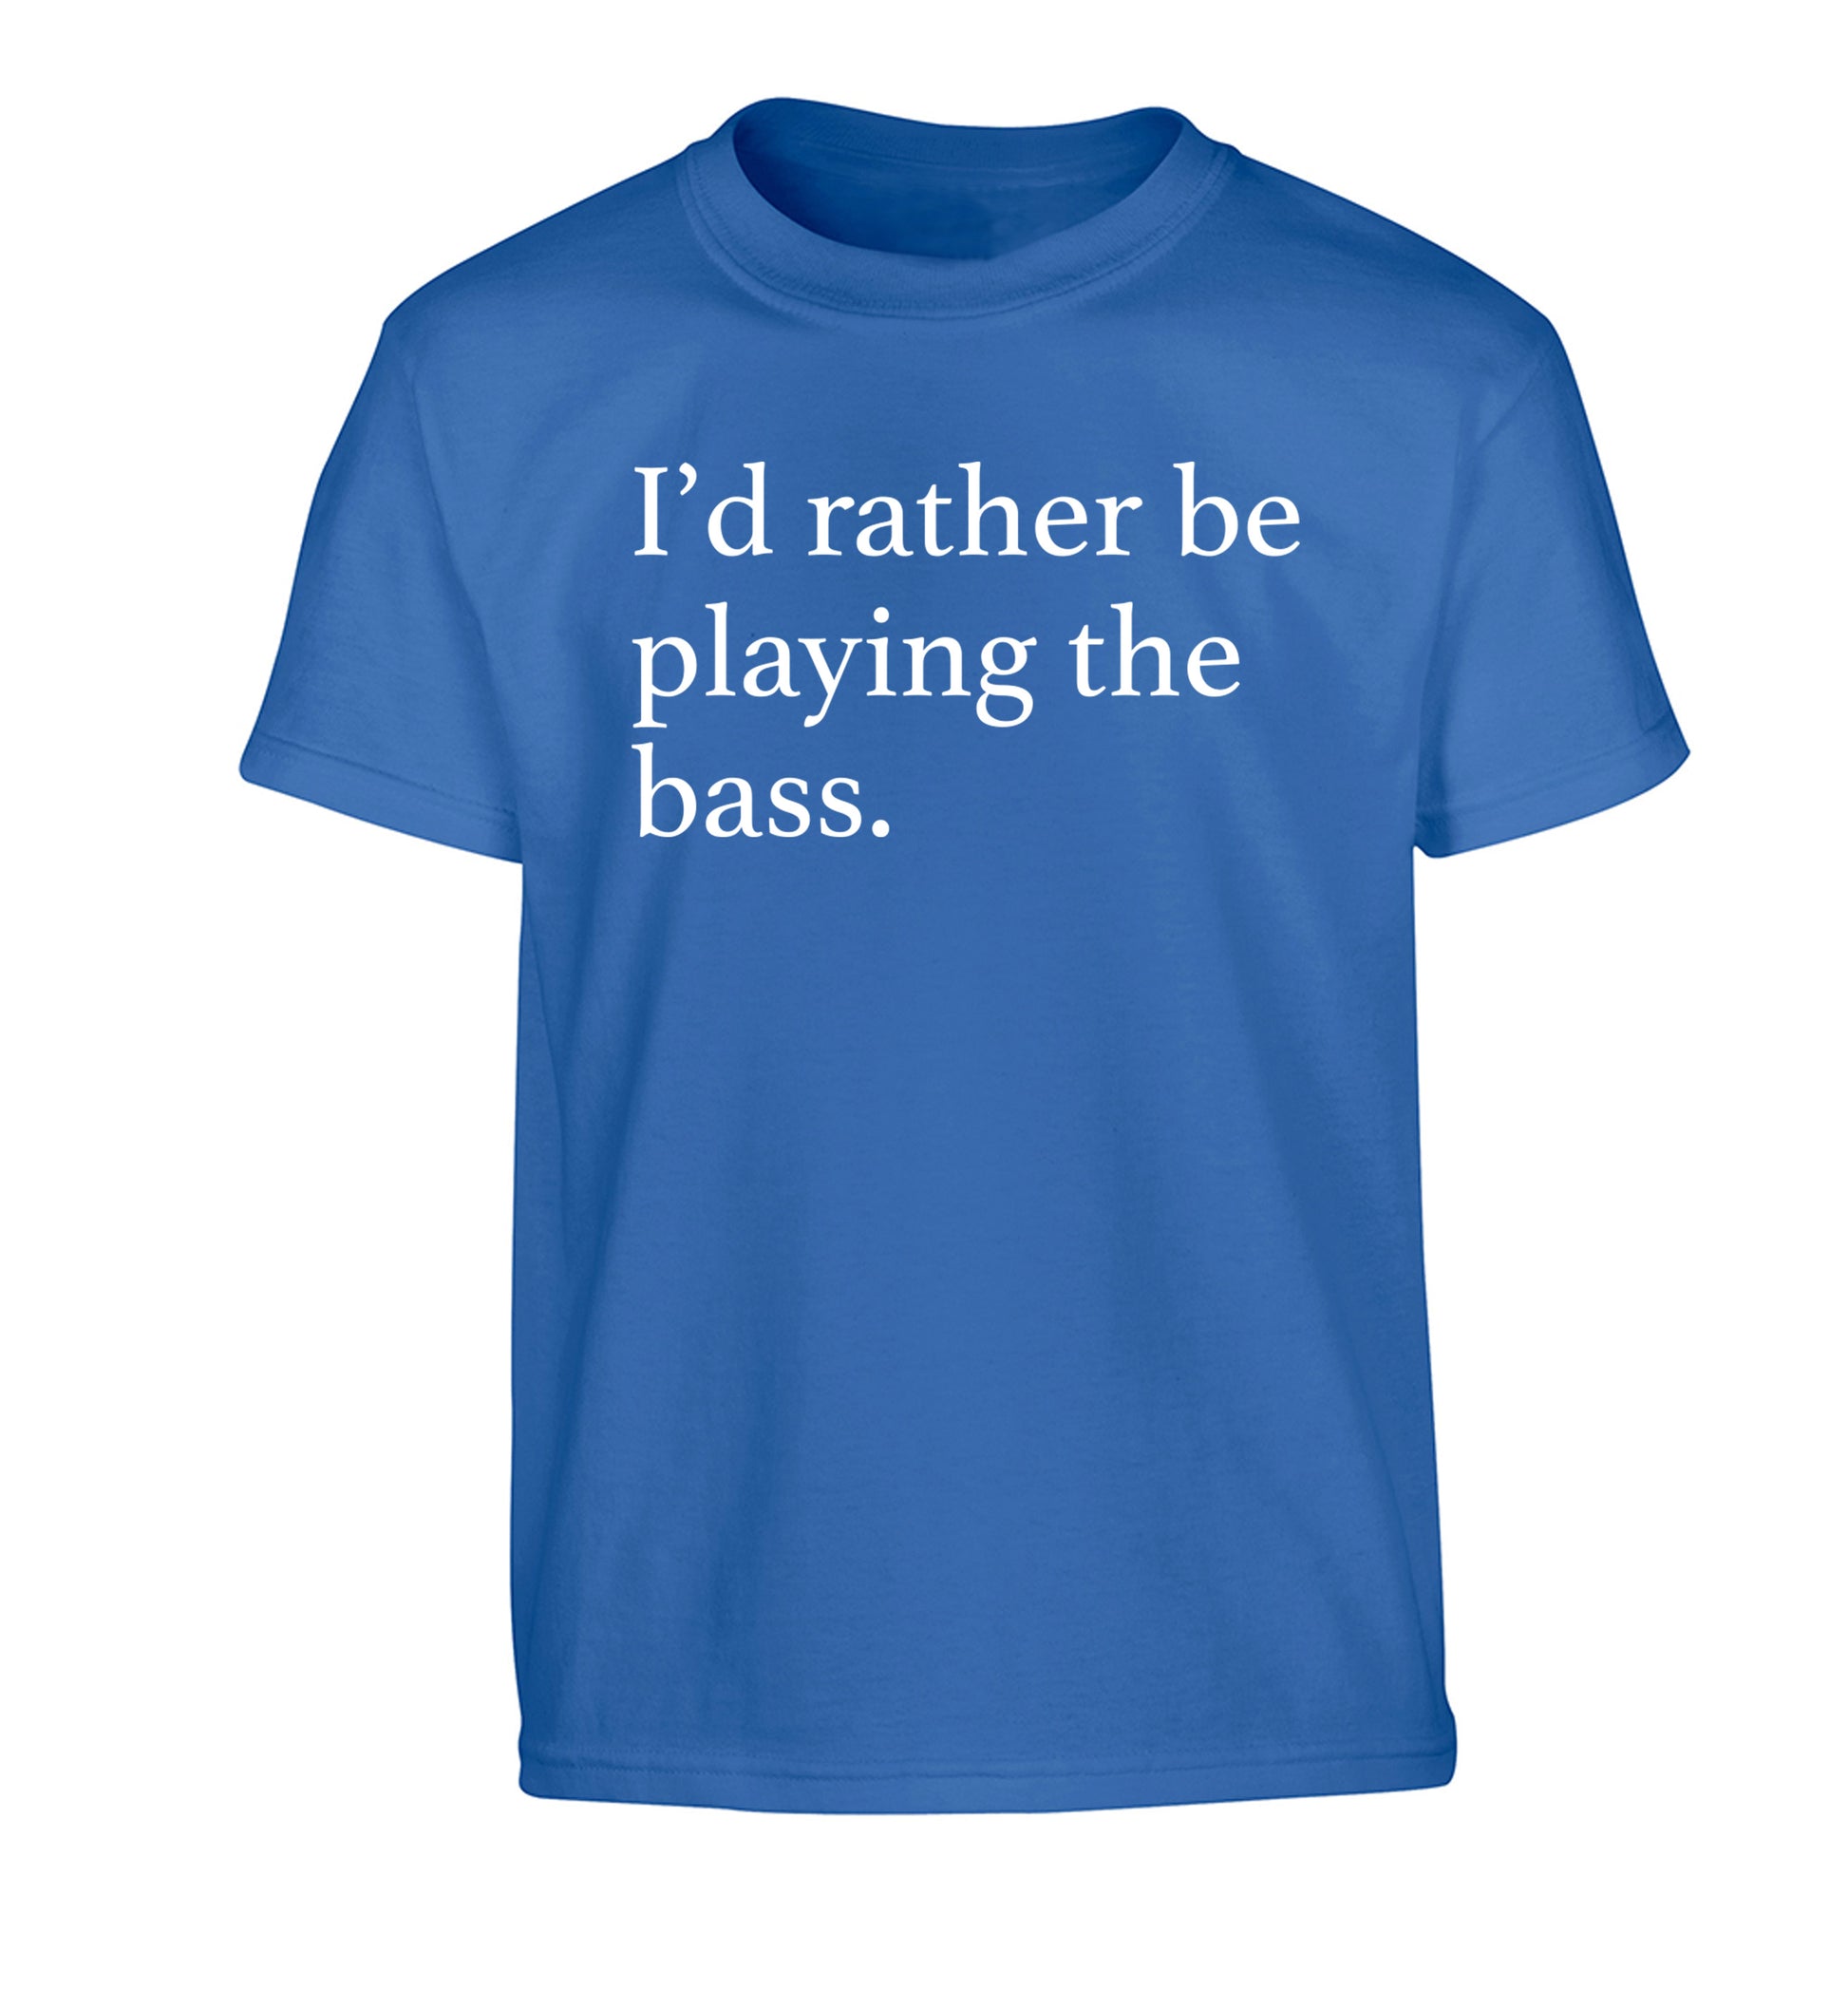 I'd rather by playing the bass Children's blue Tshirt 12-14 Years